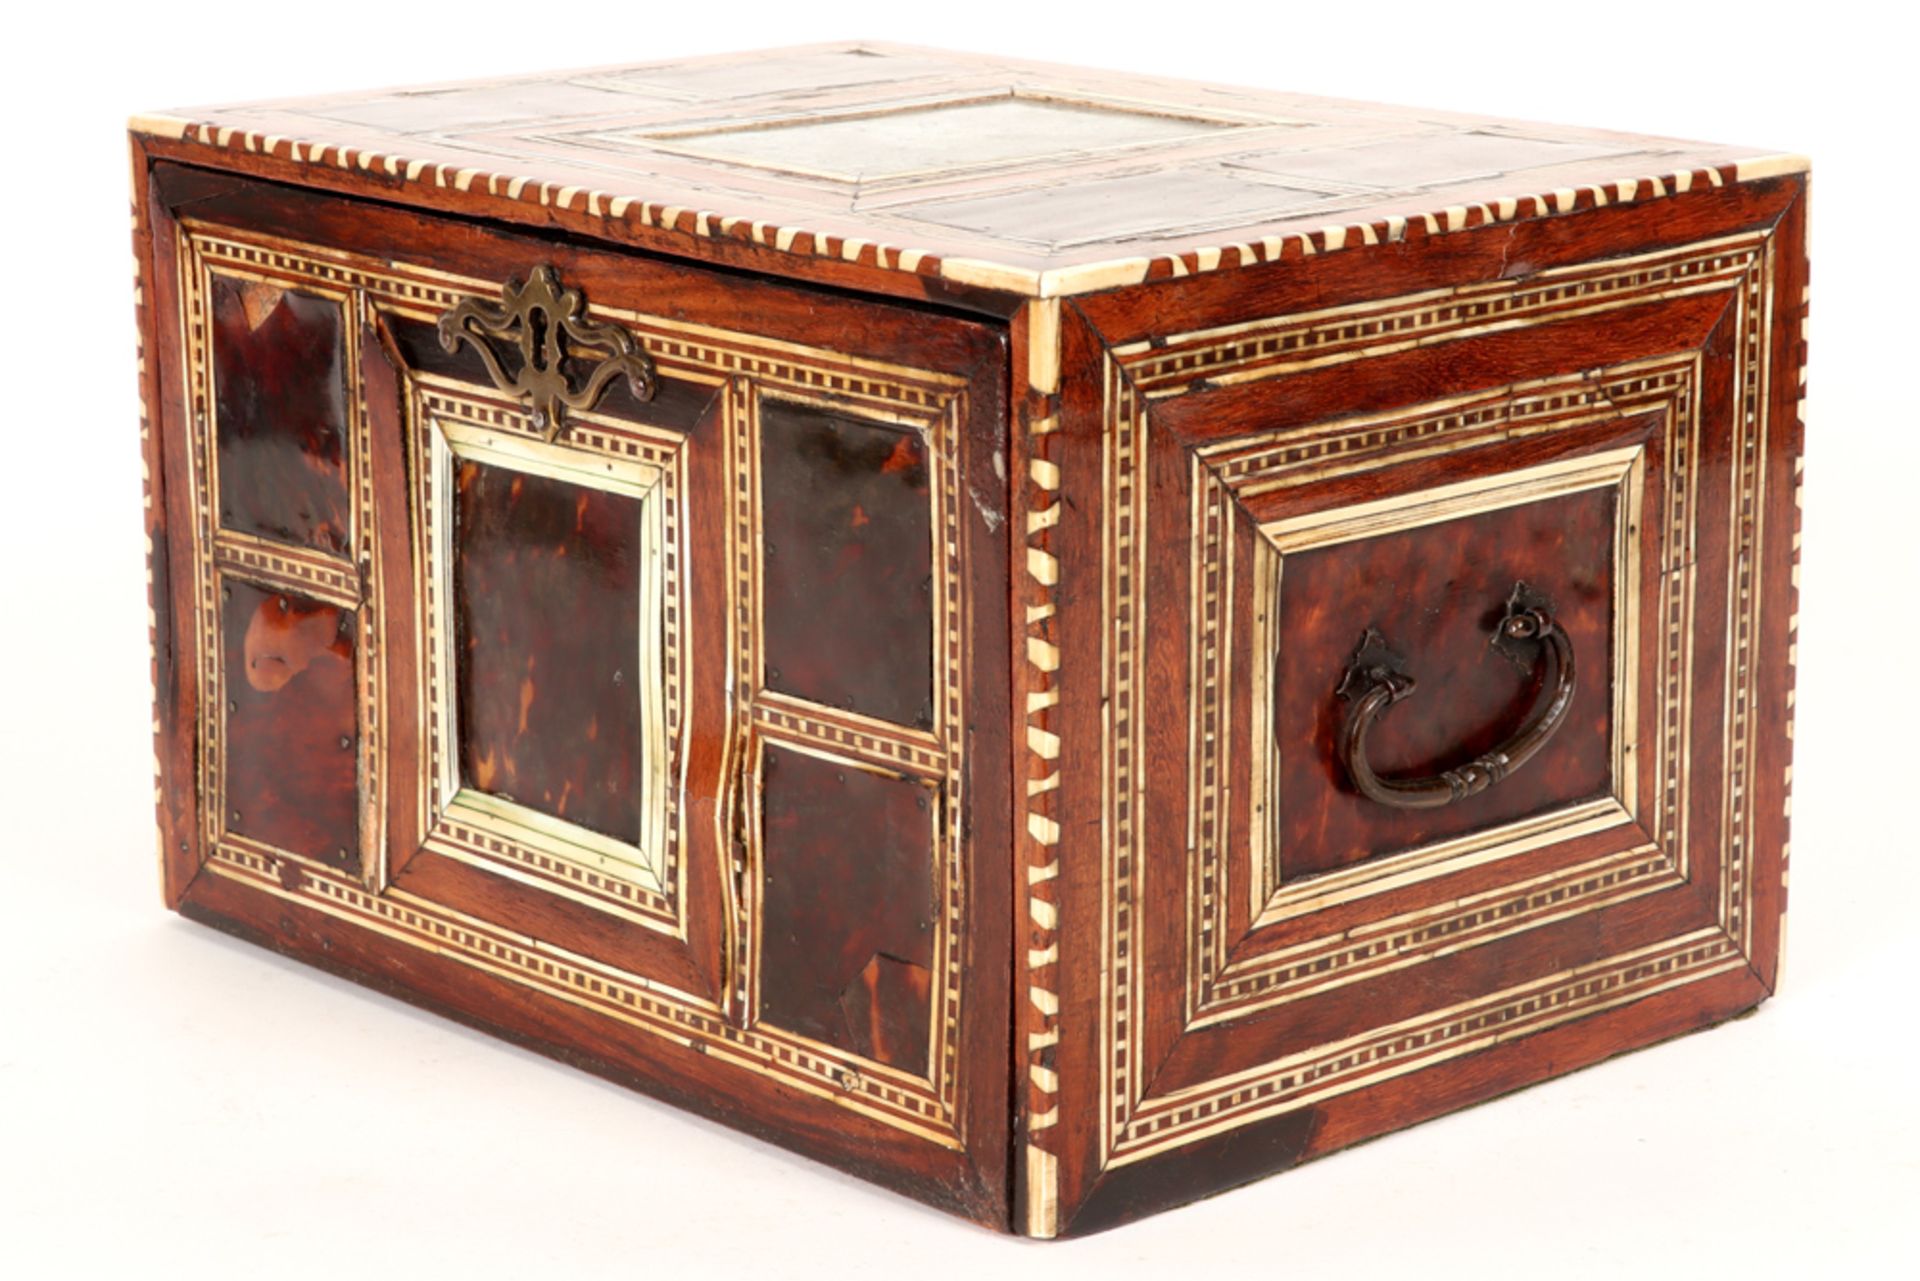 17th Cent. Indo-Portuguese table cabinet in rose-wood, ivory and tortoiseshell with an original - Image 3 of 7